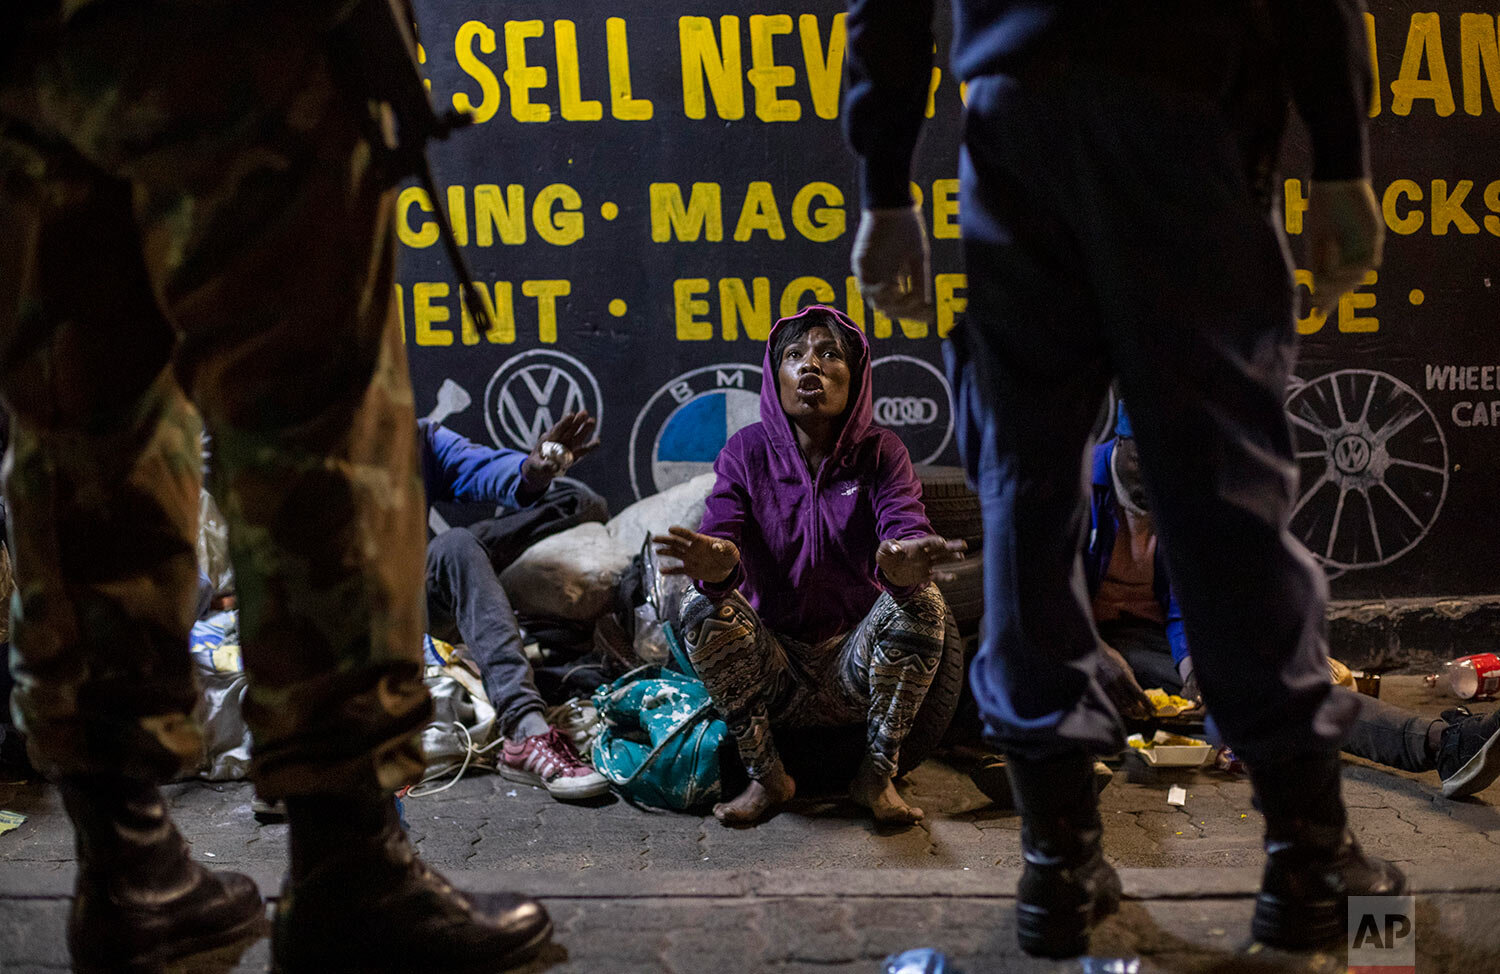 South Africa faces division again, from virus — AP Photos